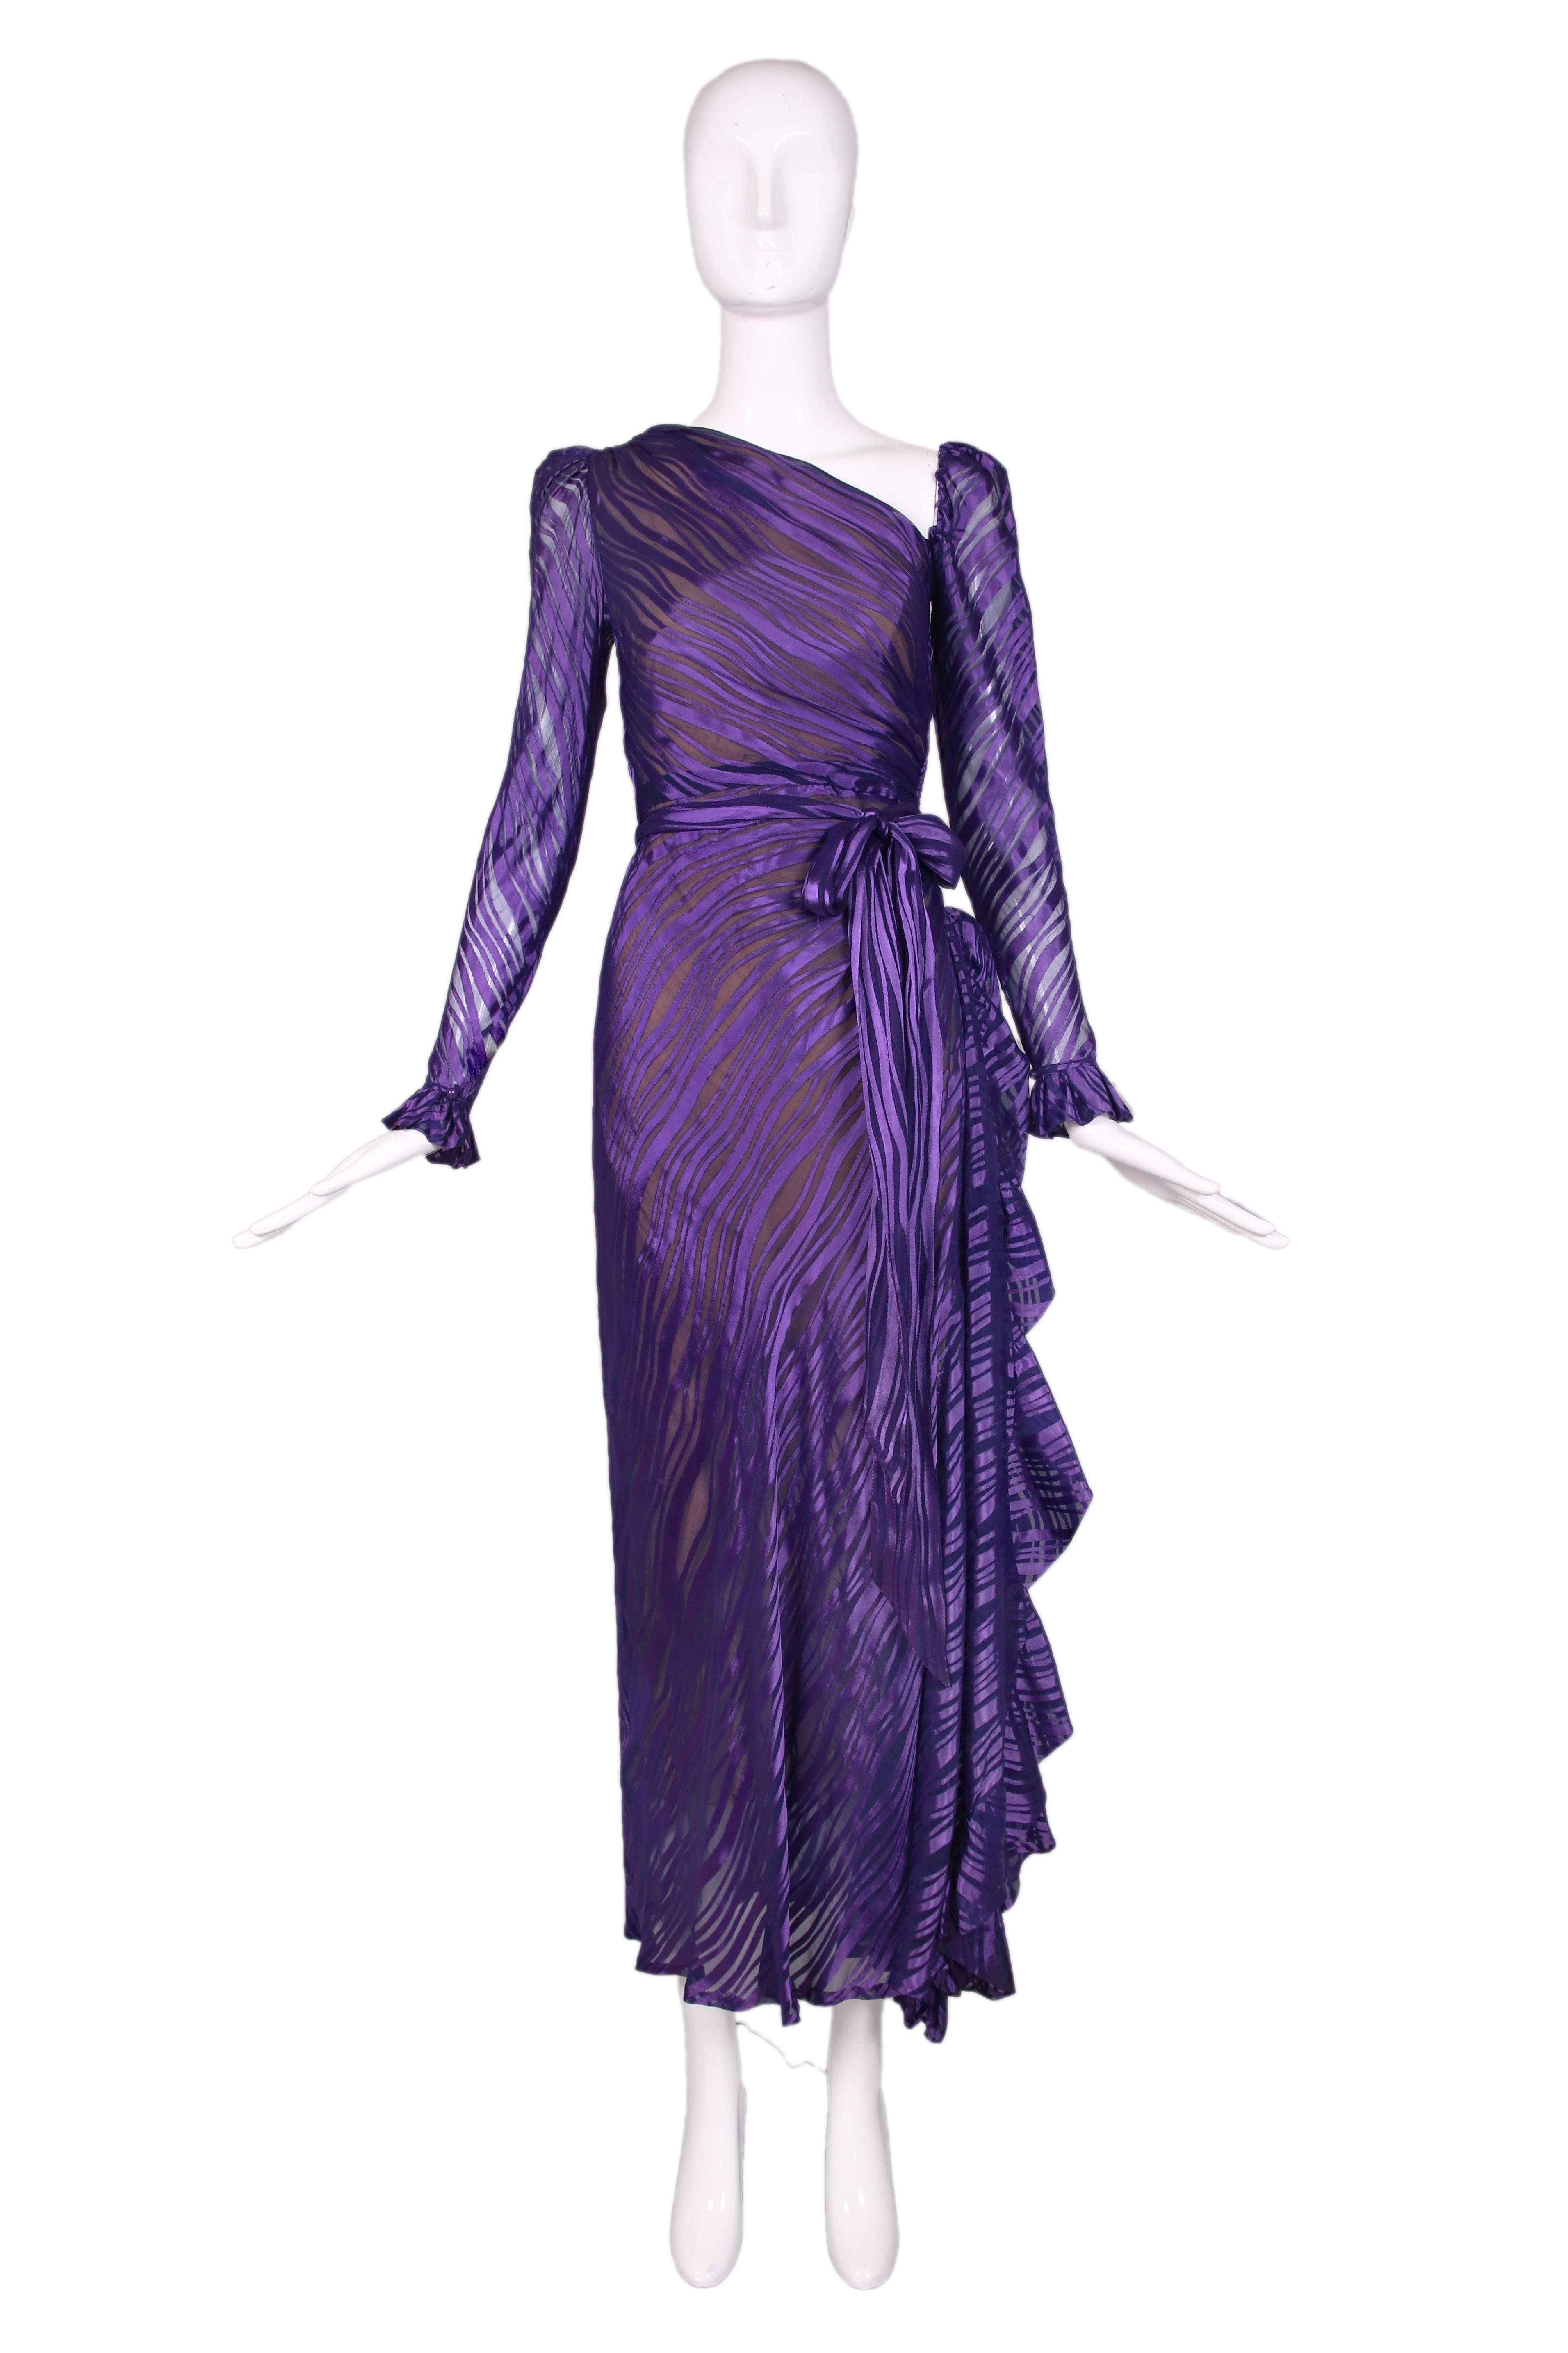 1970's Yves Saint Laurent sheer silk damask gown in deep royal purple. The dress has an asymmetrical neckline, classic YSL ruffles at the cuffs and side slit with a self sash belt. This dress is a show stopper. In good vintage condition with tiny